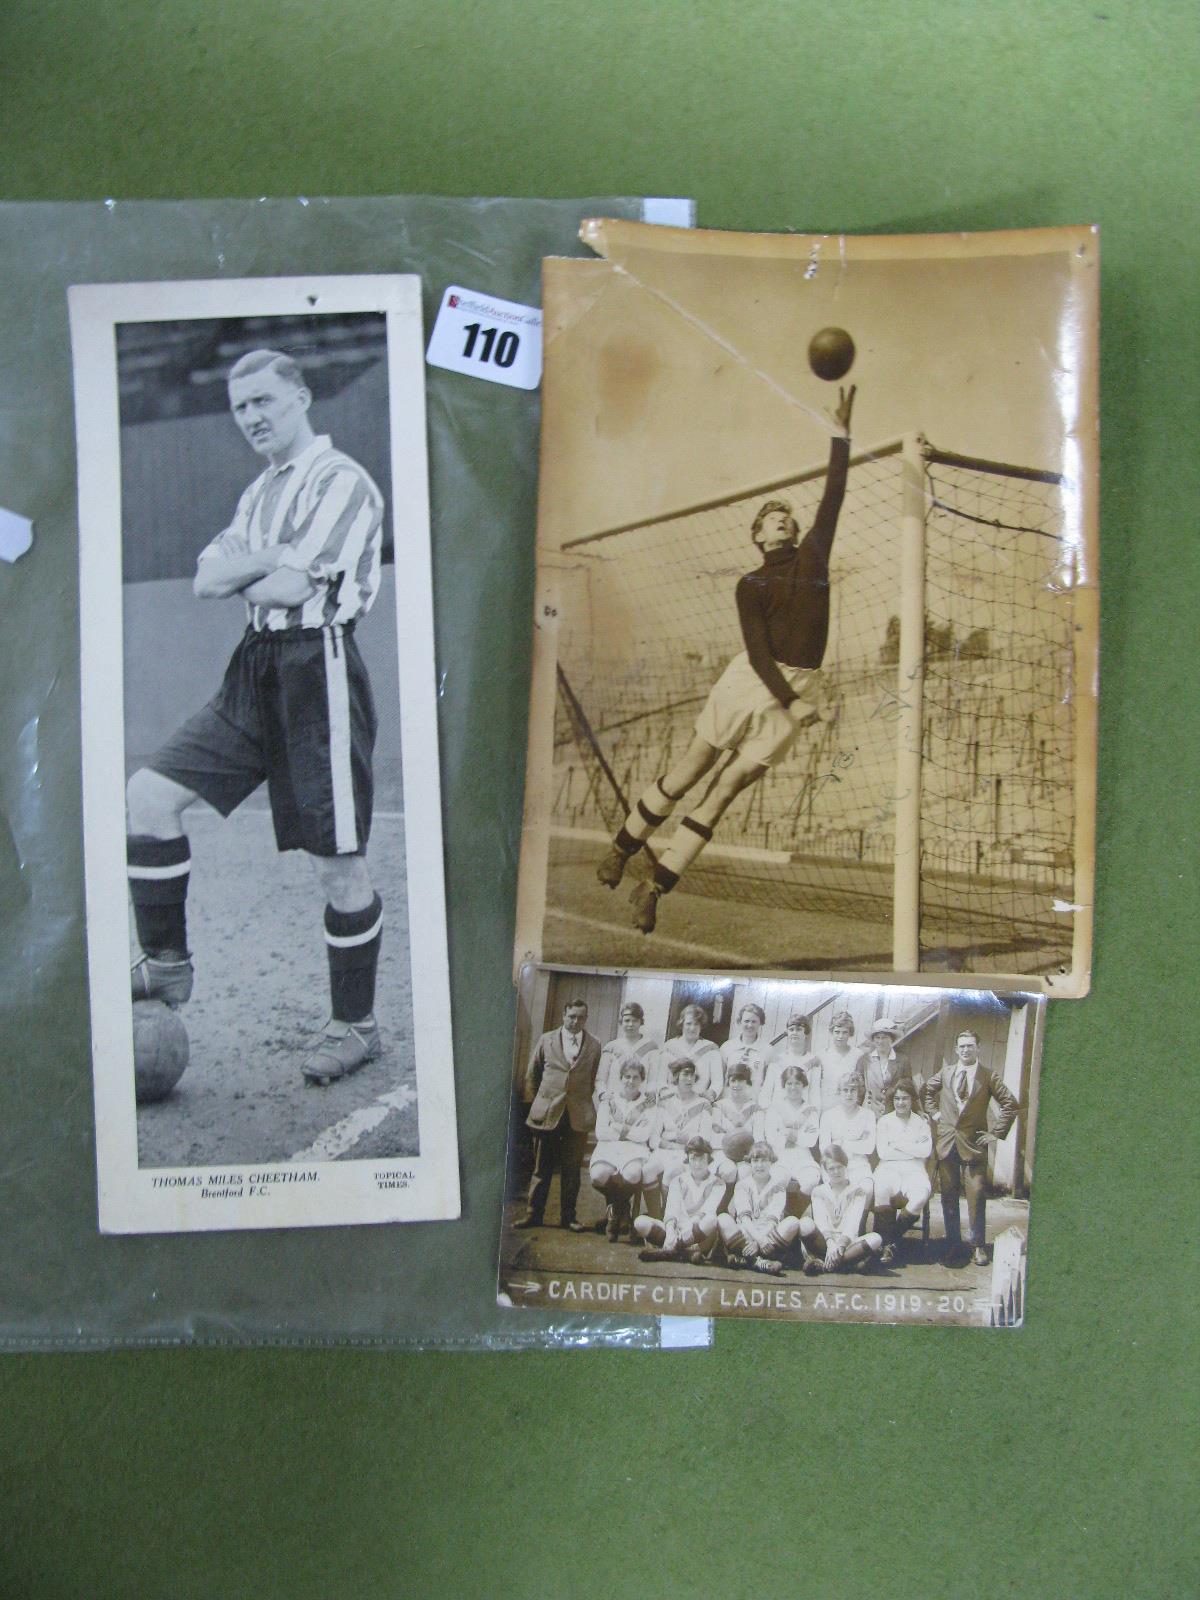 Cardiff City Ladies 1919-20 Sepia Photographic Postcard of Team, featuring fourteen players and